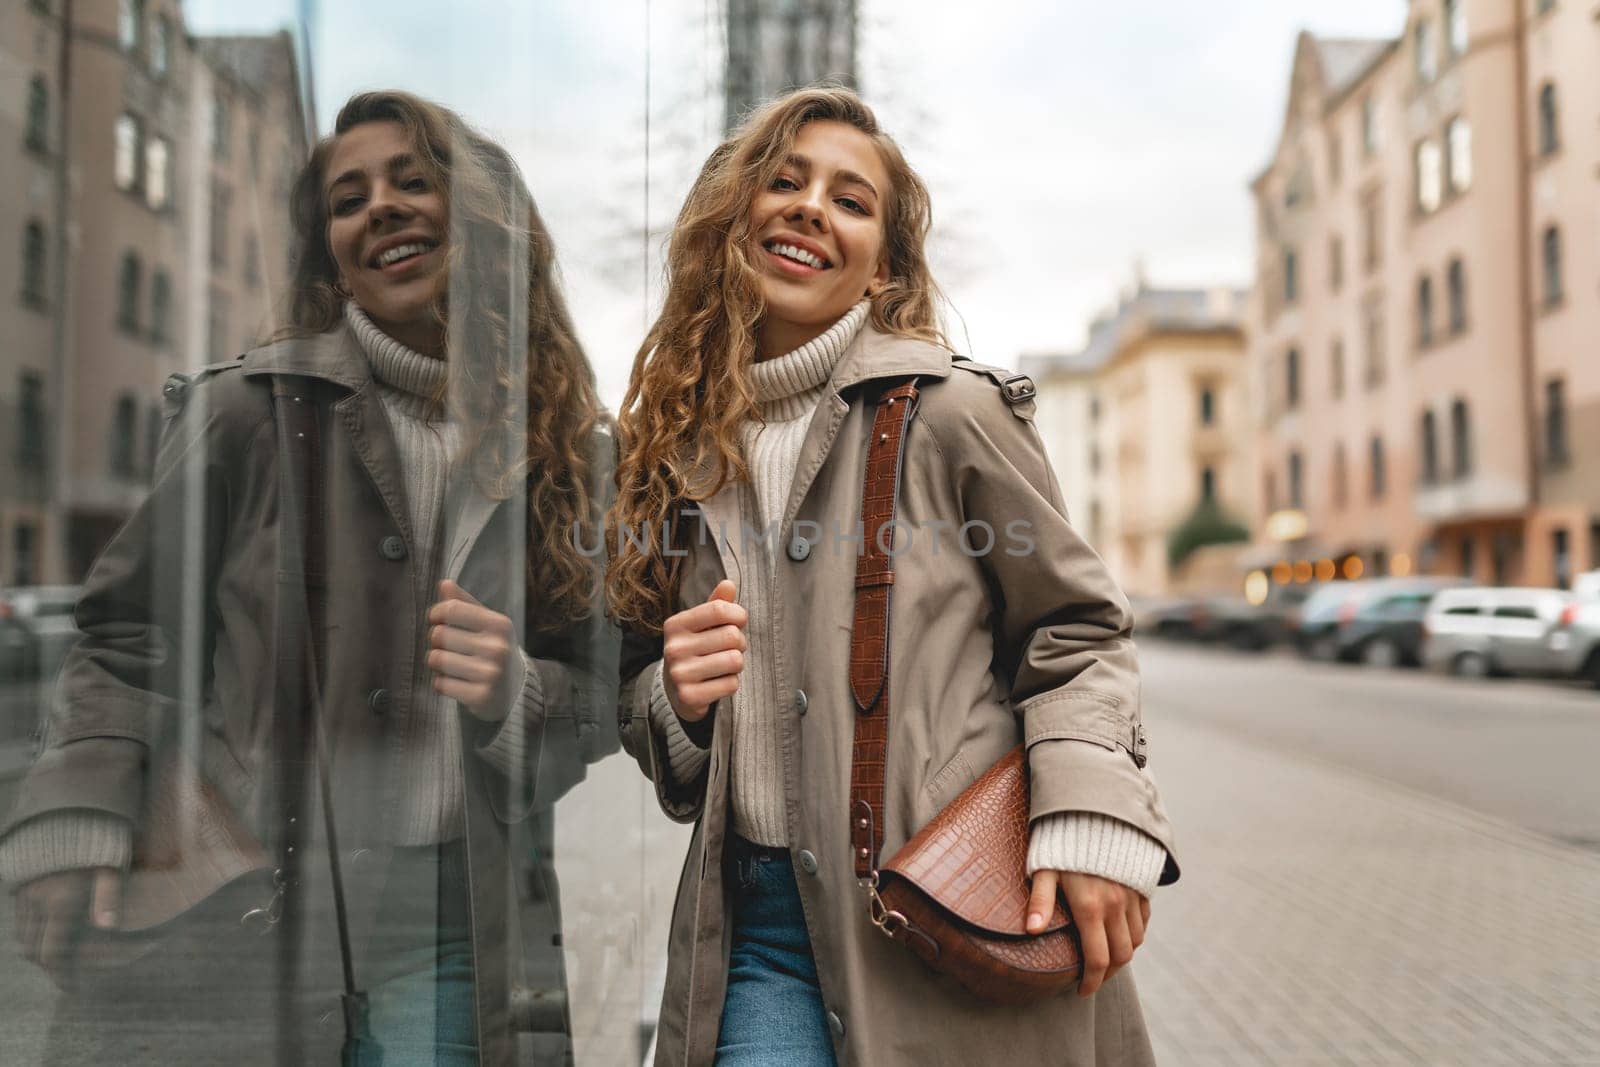 Autumn portrait of young fashionable woman wearing trendy coat in the street, close up